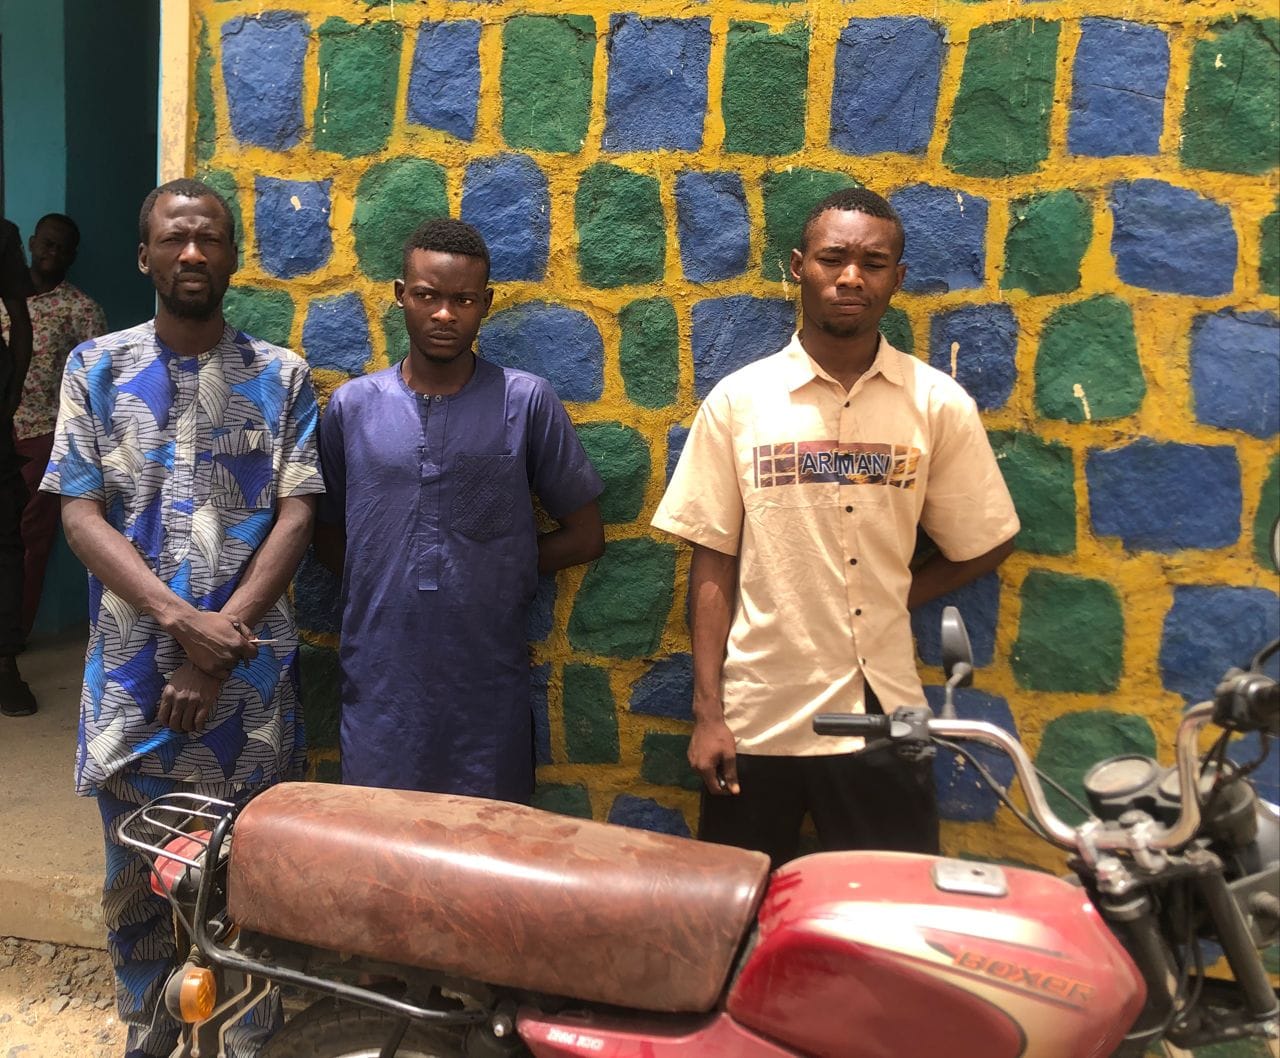 Three men steal a motorcycle valued at N400,000 in Bauchi, sell it for N100k and use money to lodge in hotel with their girlfriends